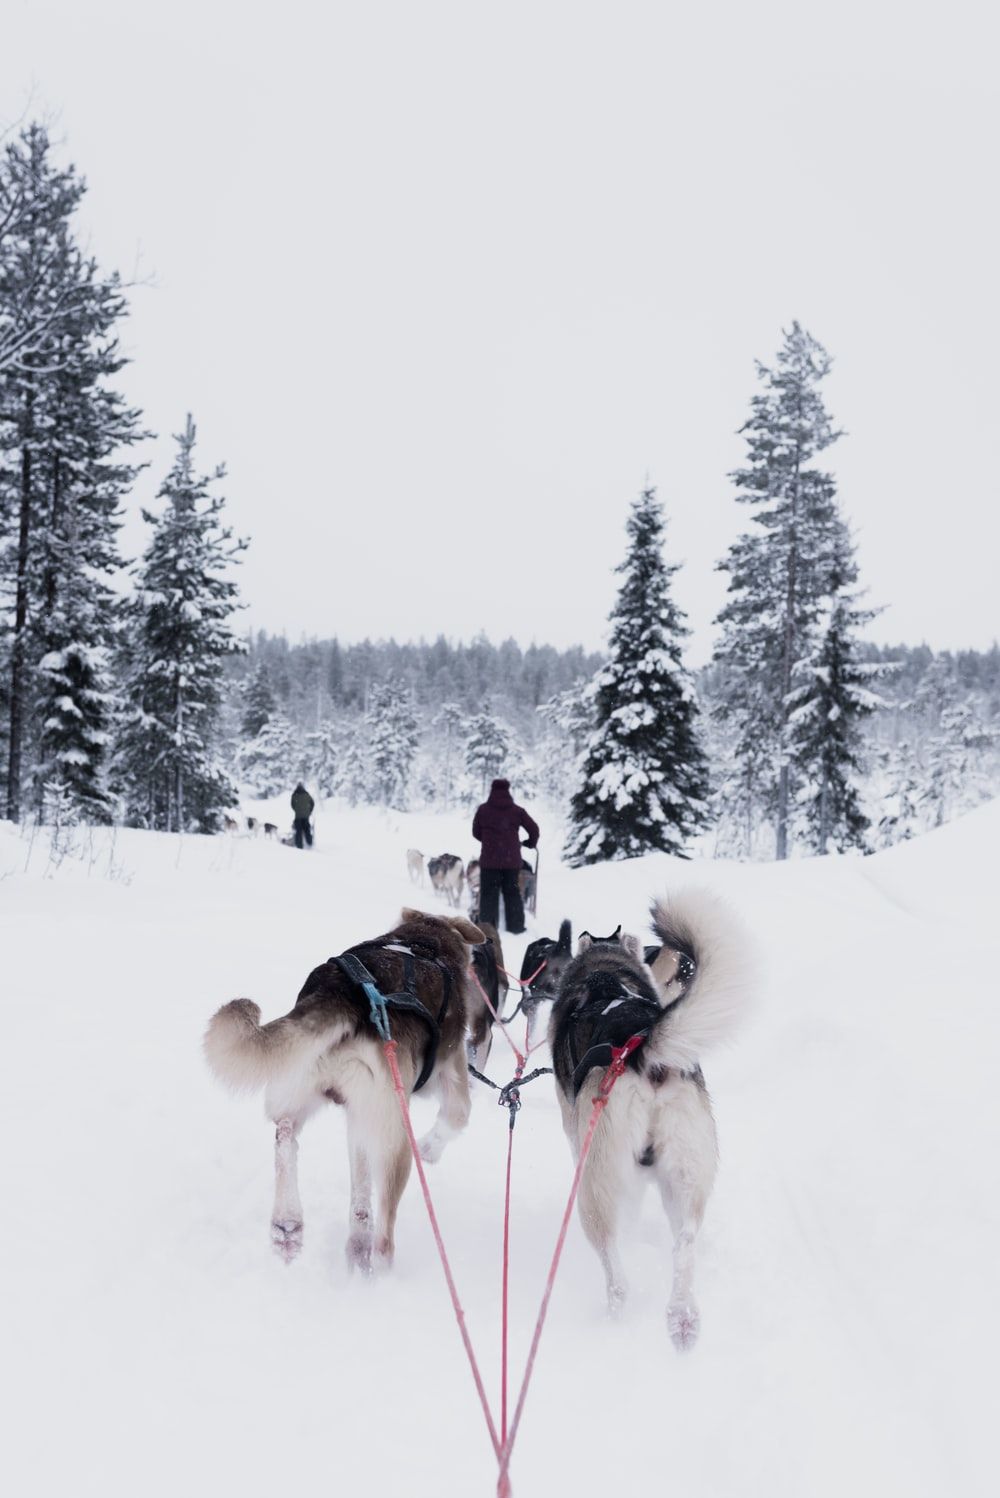 Sled Dog Picture. Download Free Image